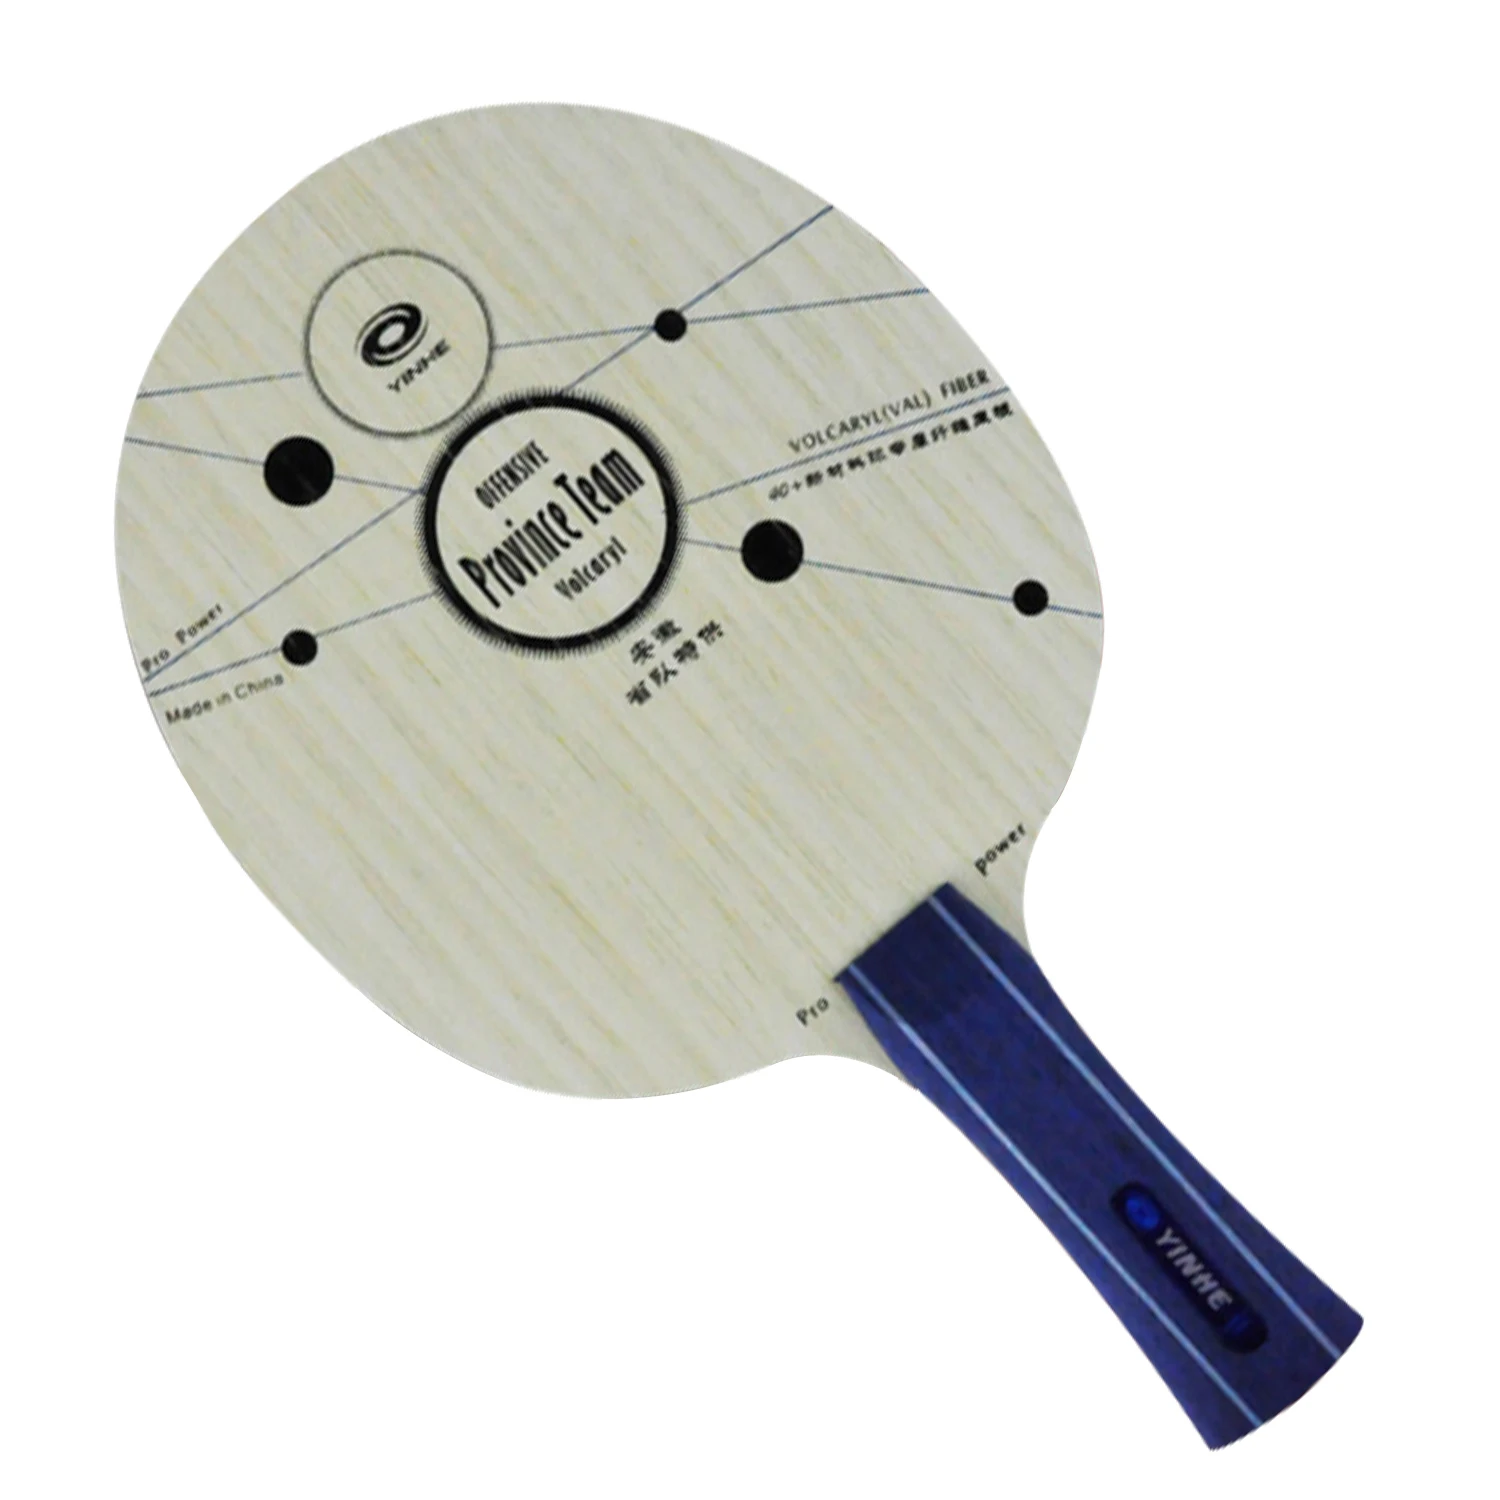 Original yinhe PRO-Power Pro-feeling table tennis blade henan and anhui provincial team fast attack loop table tennis racket